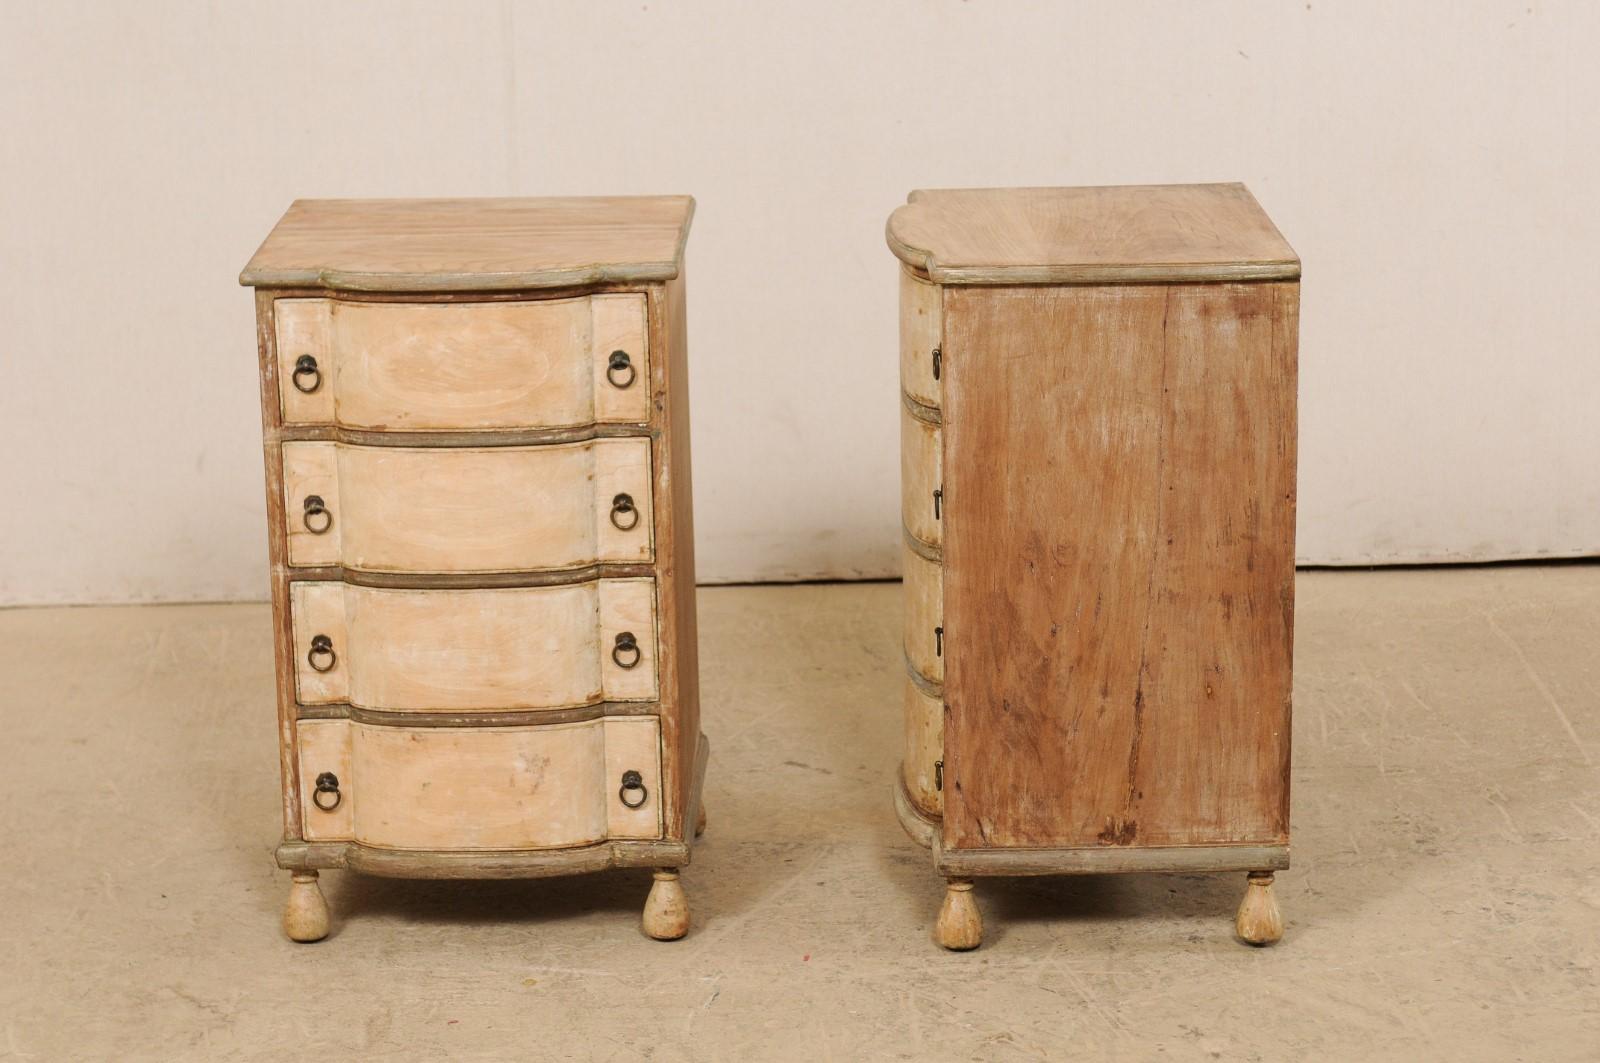 Italian Petite Comodini '1 with Drawers and 1 a Cabinet with Faux Drawers', Pair 6